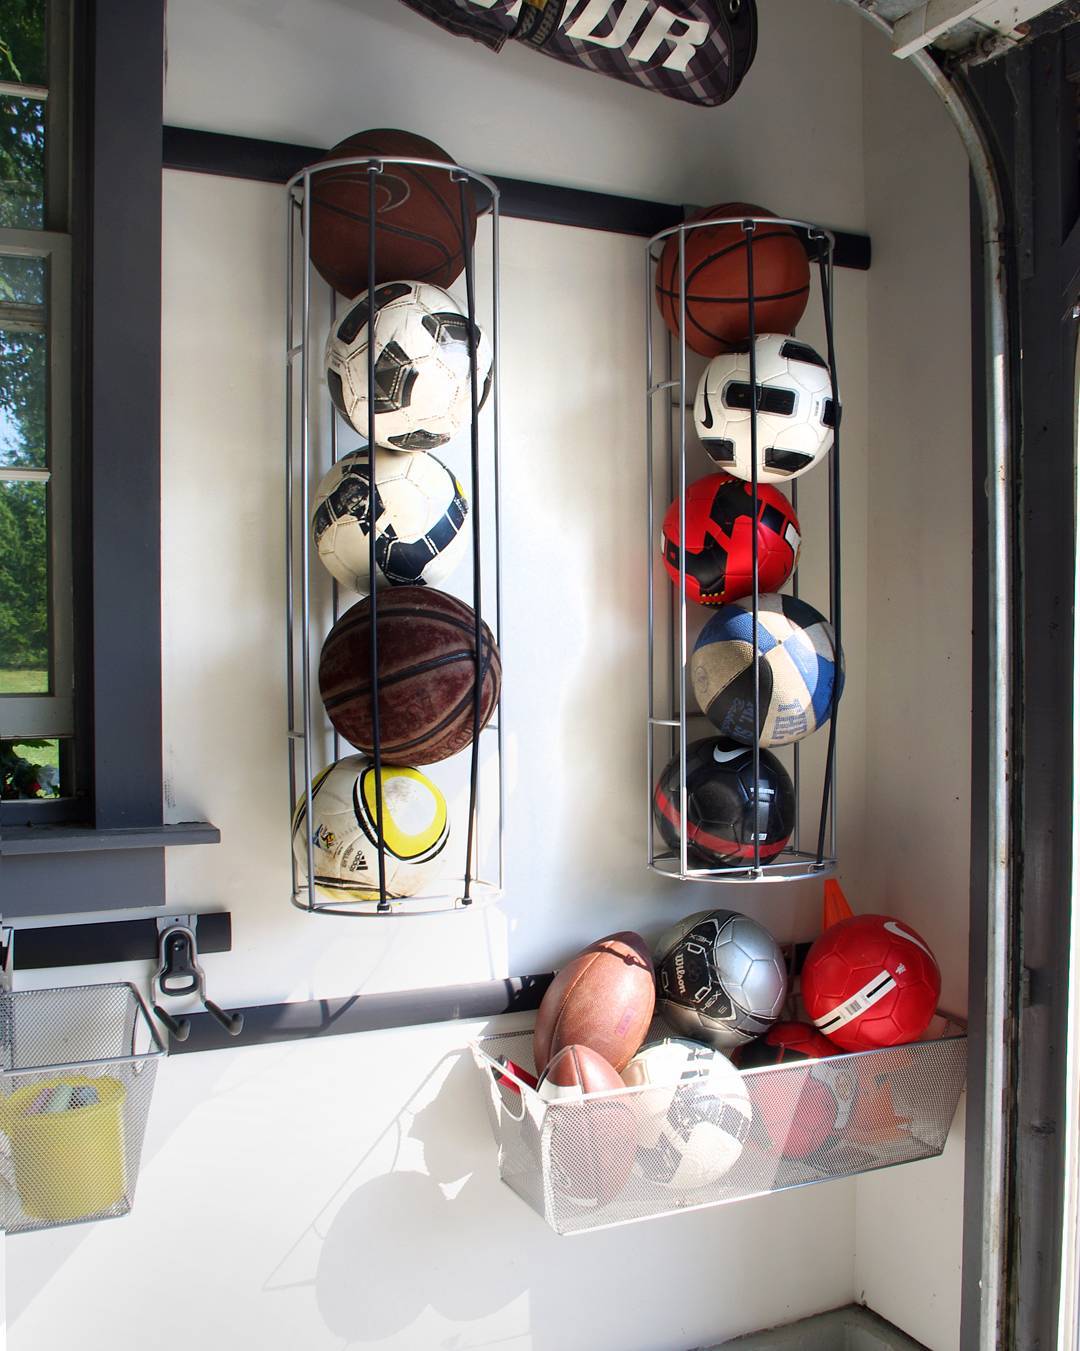 Sports Balls Stored in Vertical Nets in Garage. Photo by Instagram user @rylex_custom_cabinetry